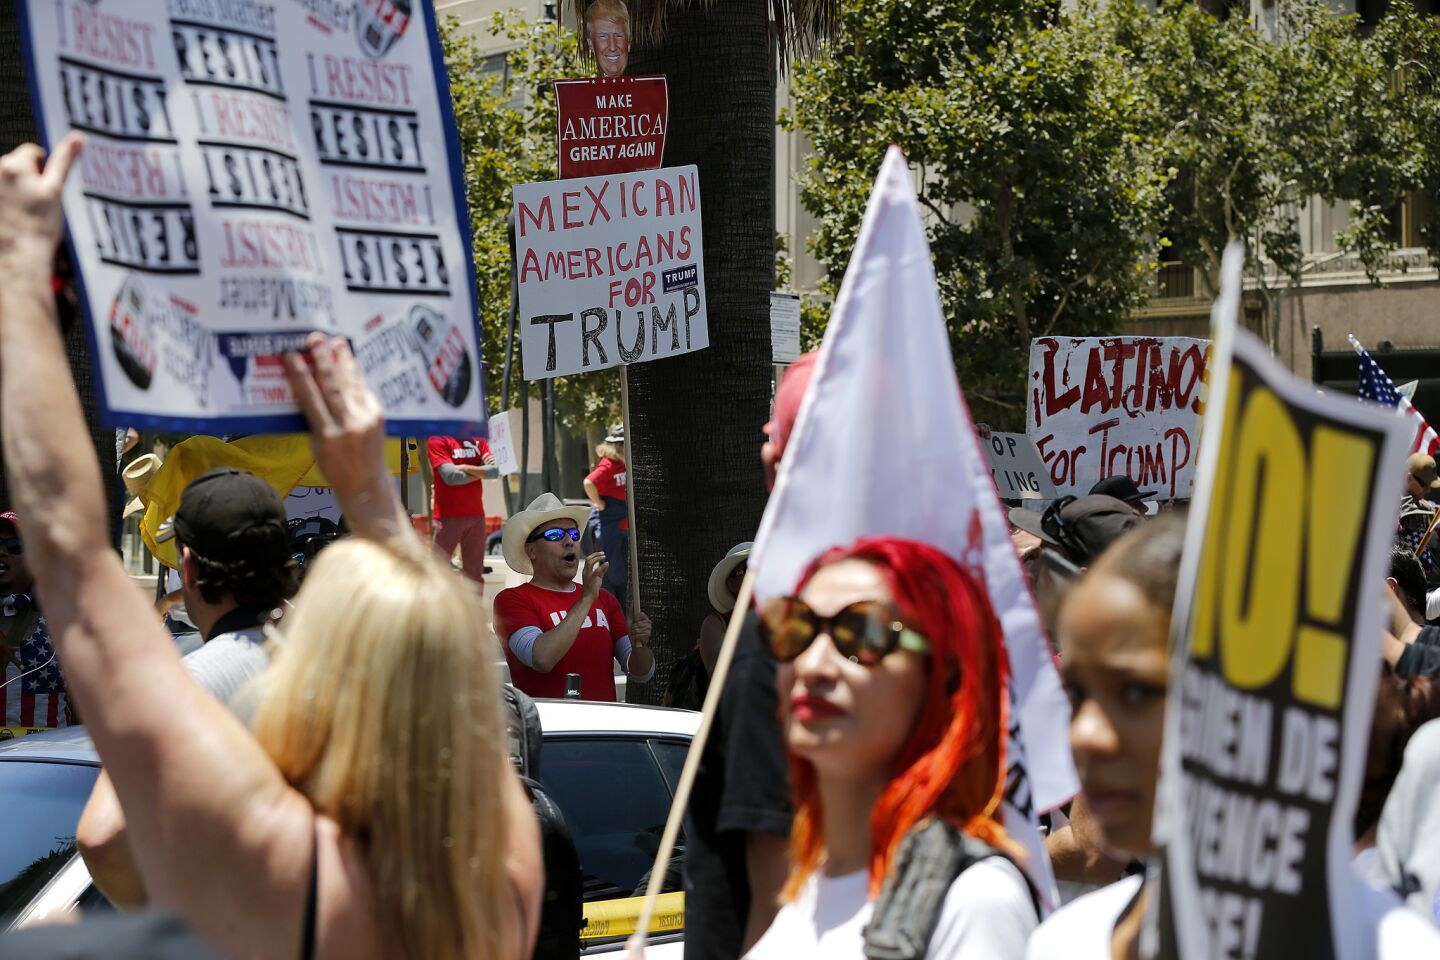 Trump supporters and protesters cross paths near LAPD headquarters in downtown L.A.